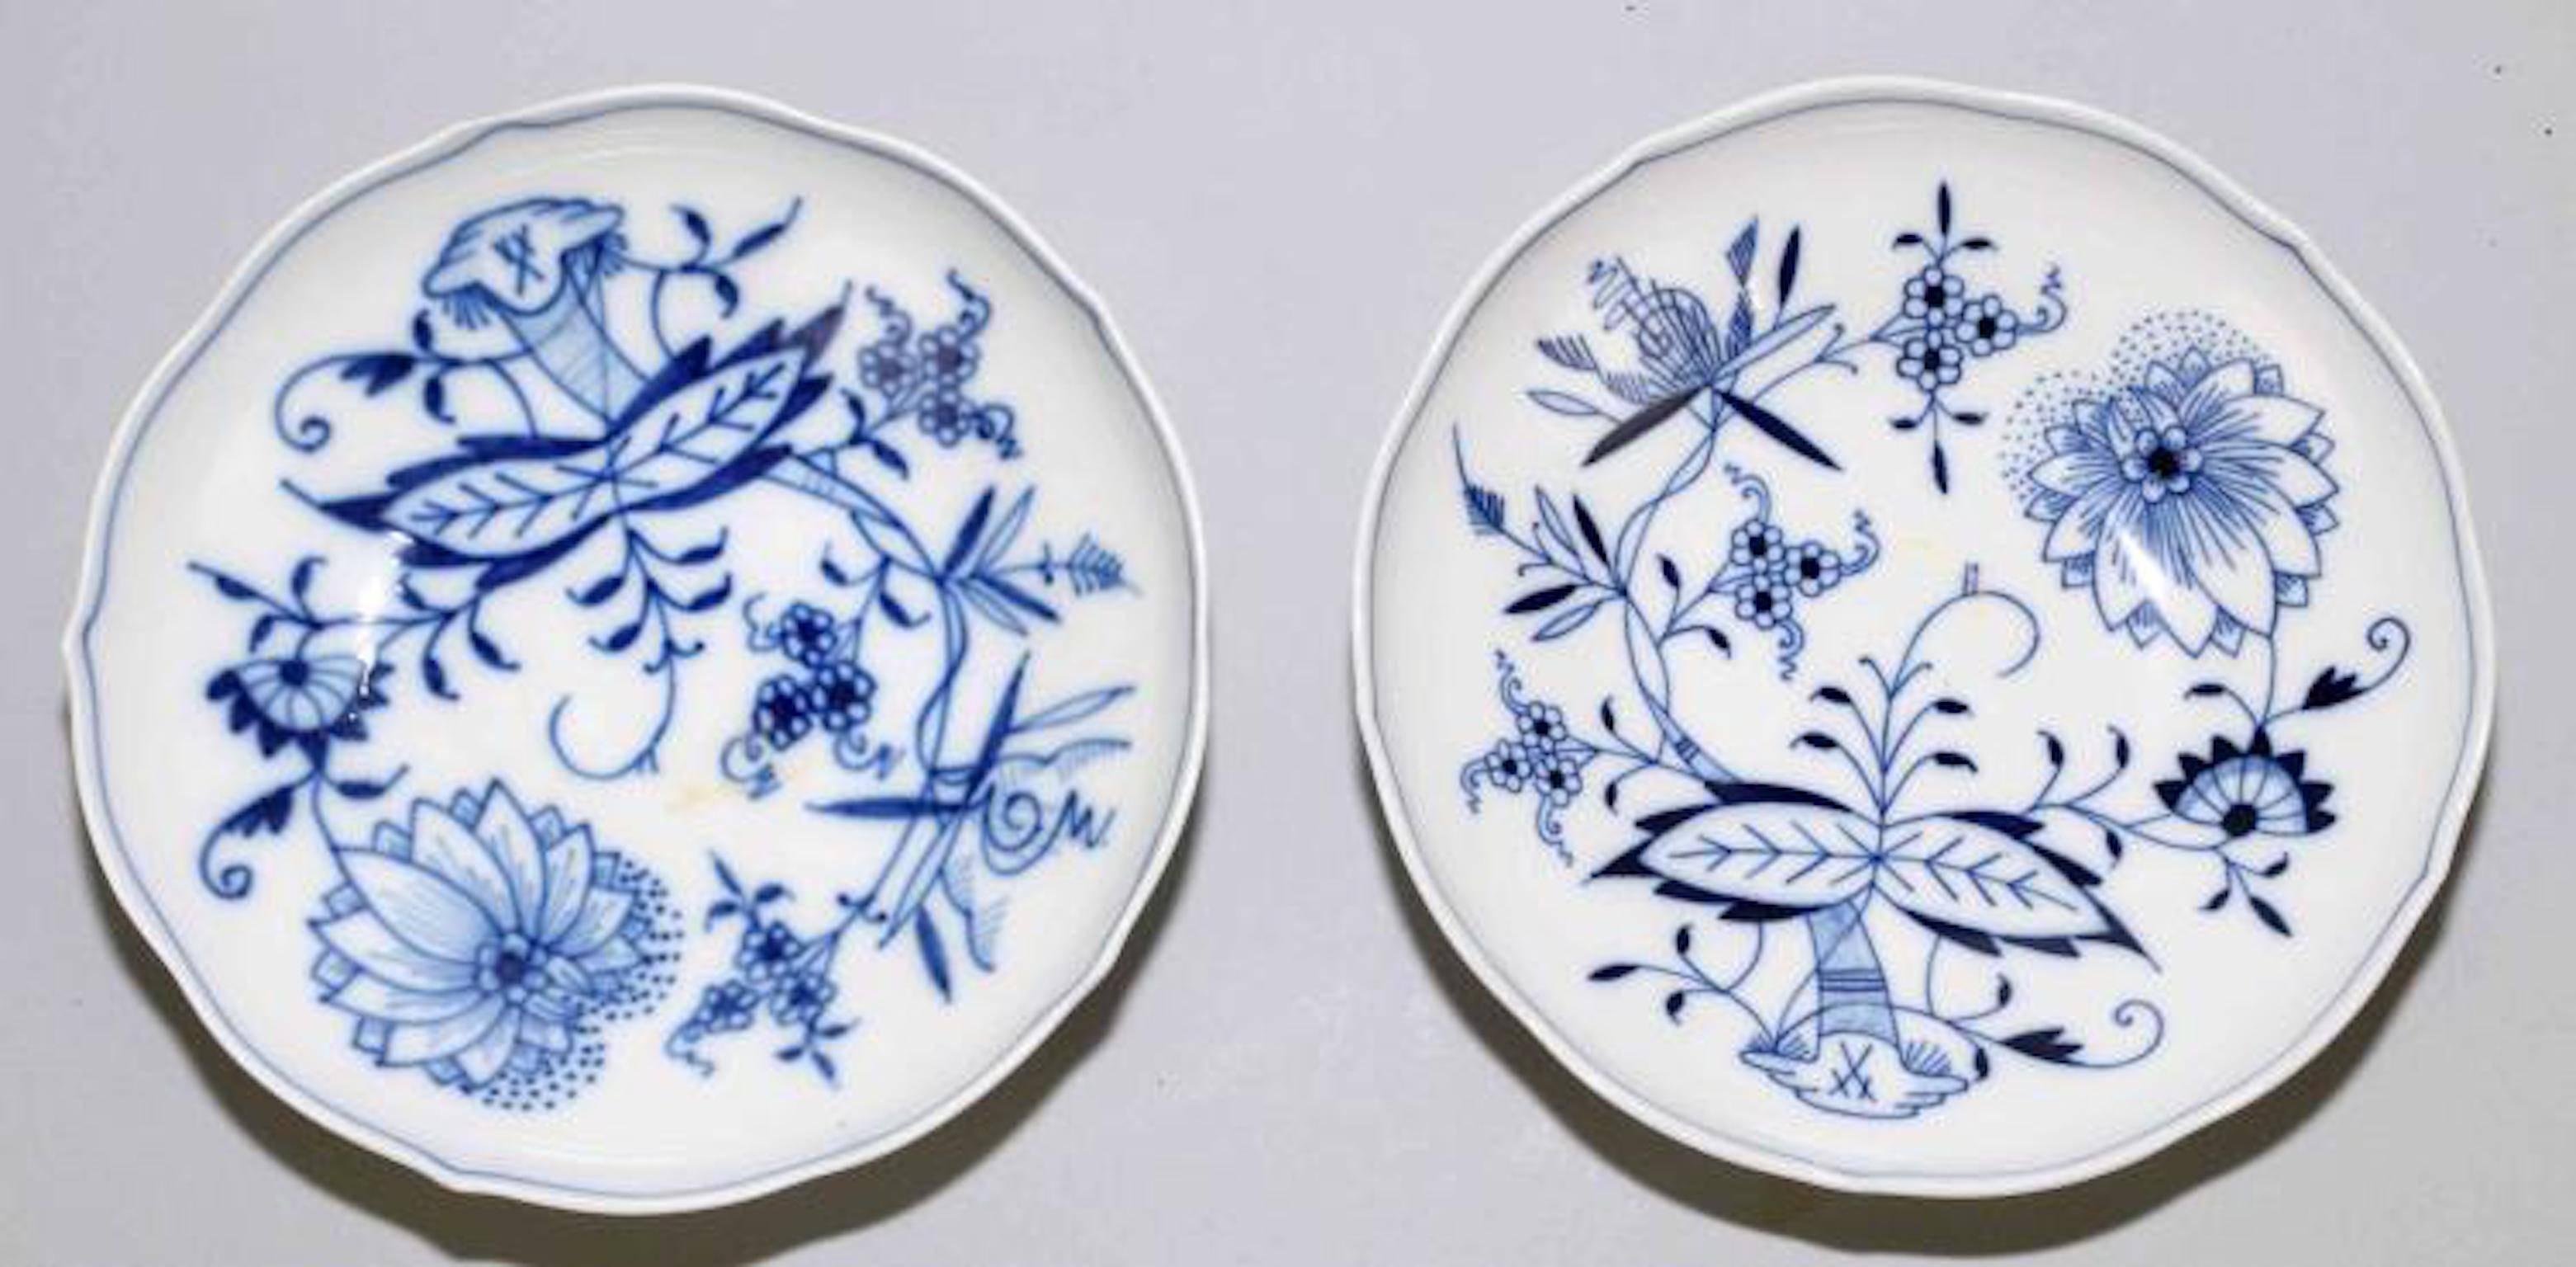 Meissen porcelain blue onion cups and saucers, set of two
Cup measures in inches: 4.5 W x 3.5 D x 2.5 H
Saucer measures in inches: 6 D x 1 H.